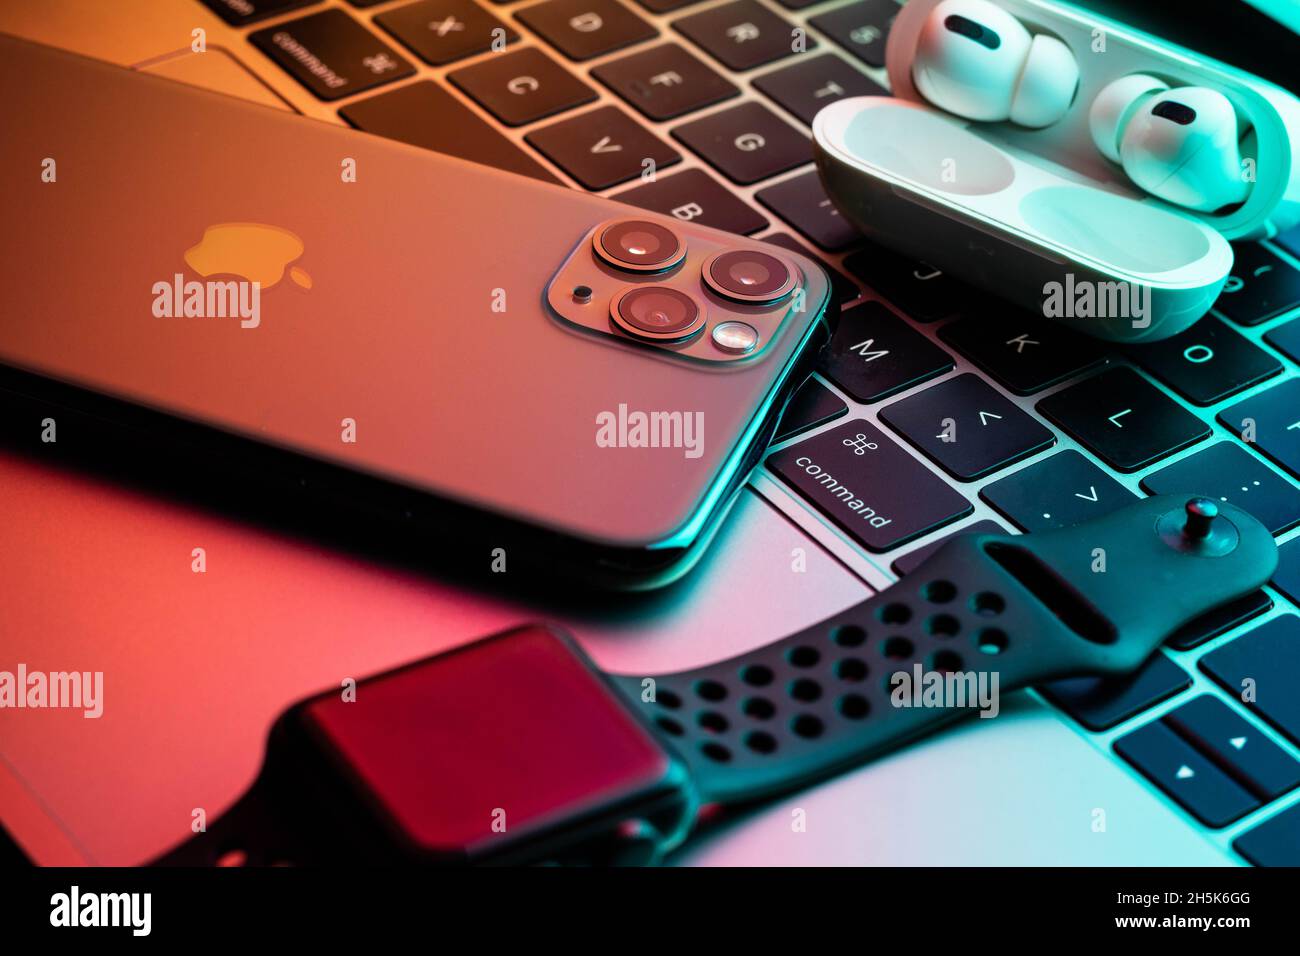 iPhone 11 Pro with AirPods Pro and Apple Watch with a Macbook in the  background Stock Photo - Alamy